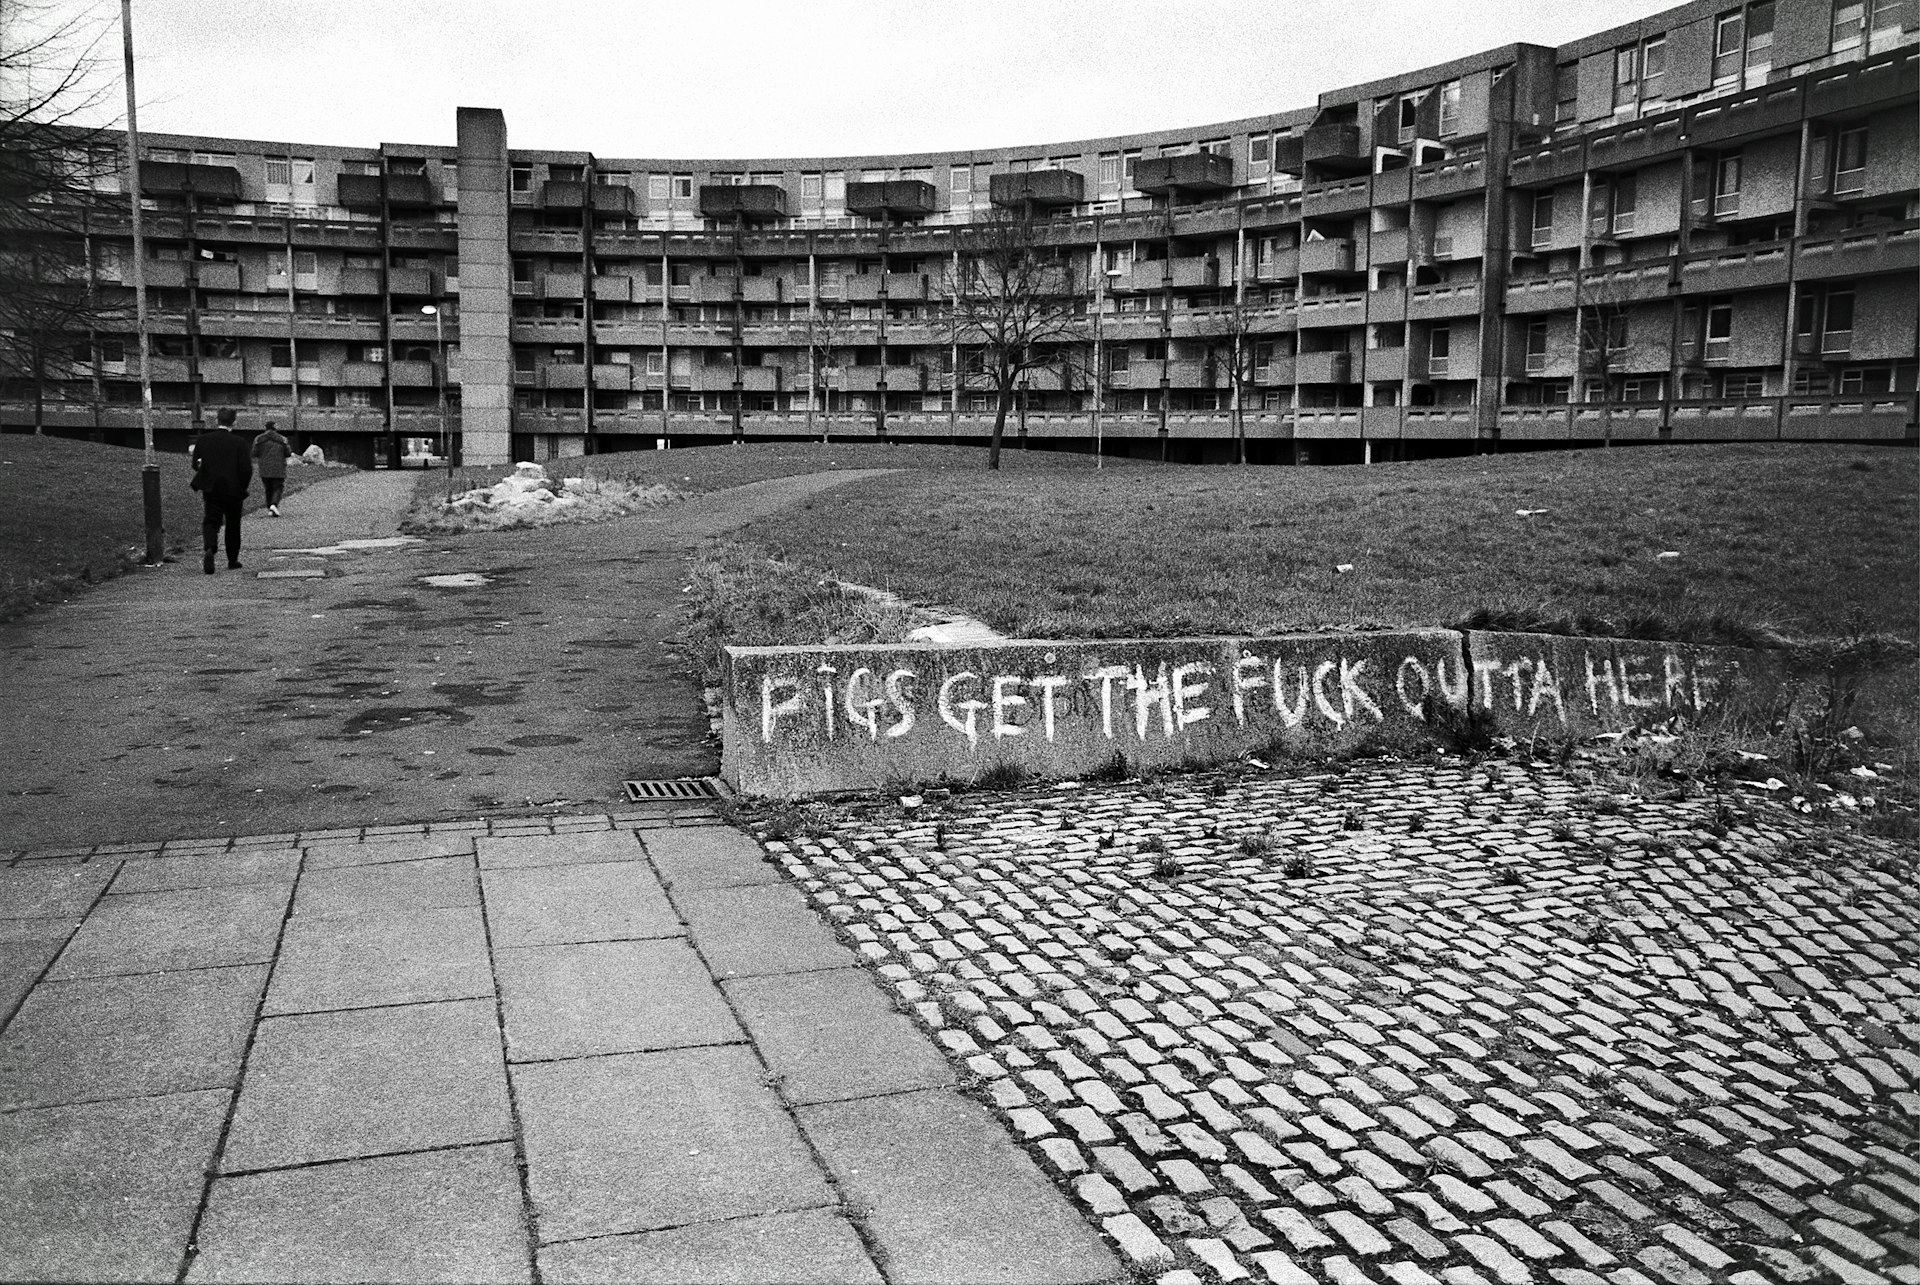 A gritty portrait of radicals and upstarts in 1980s Hulme